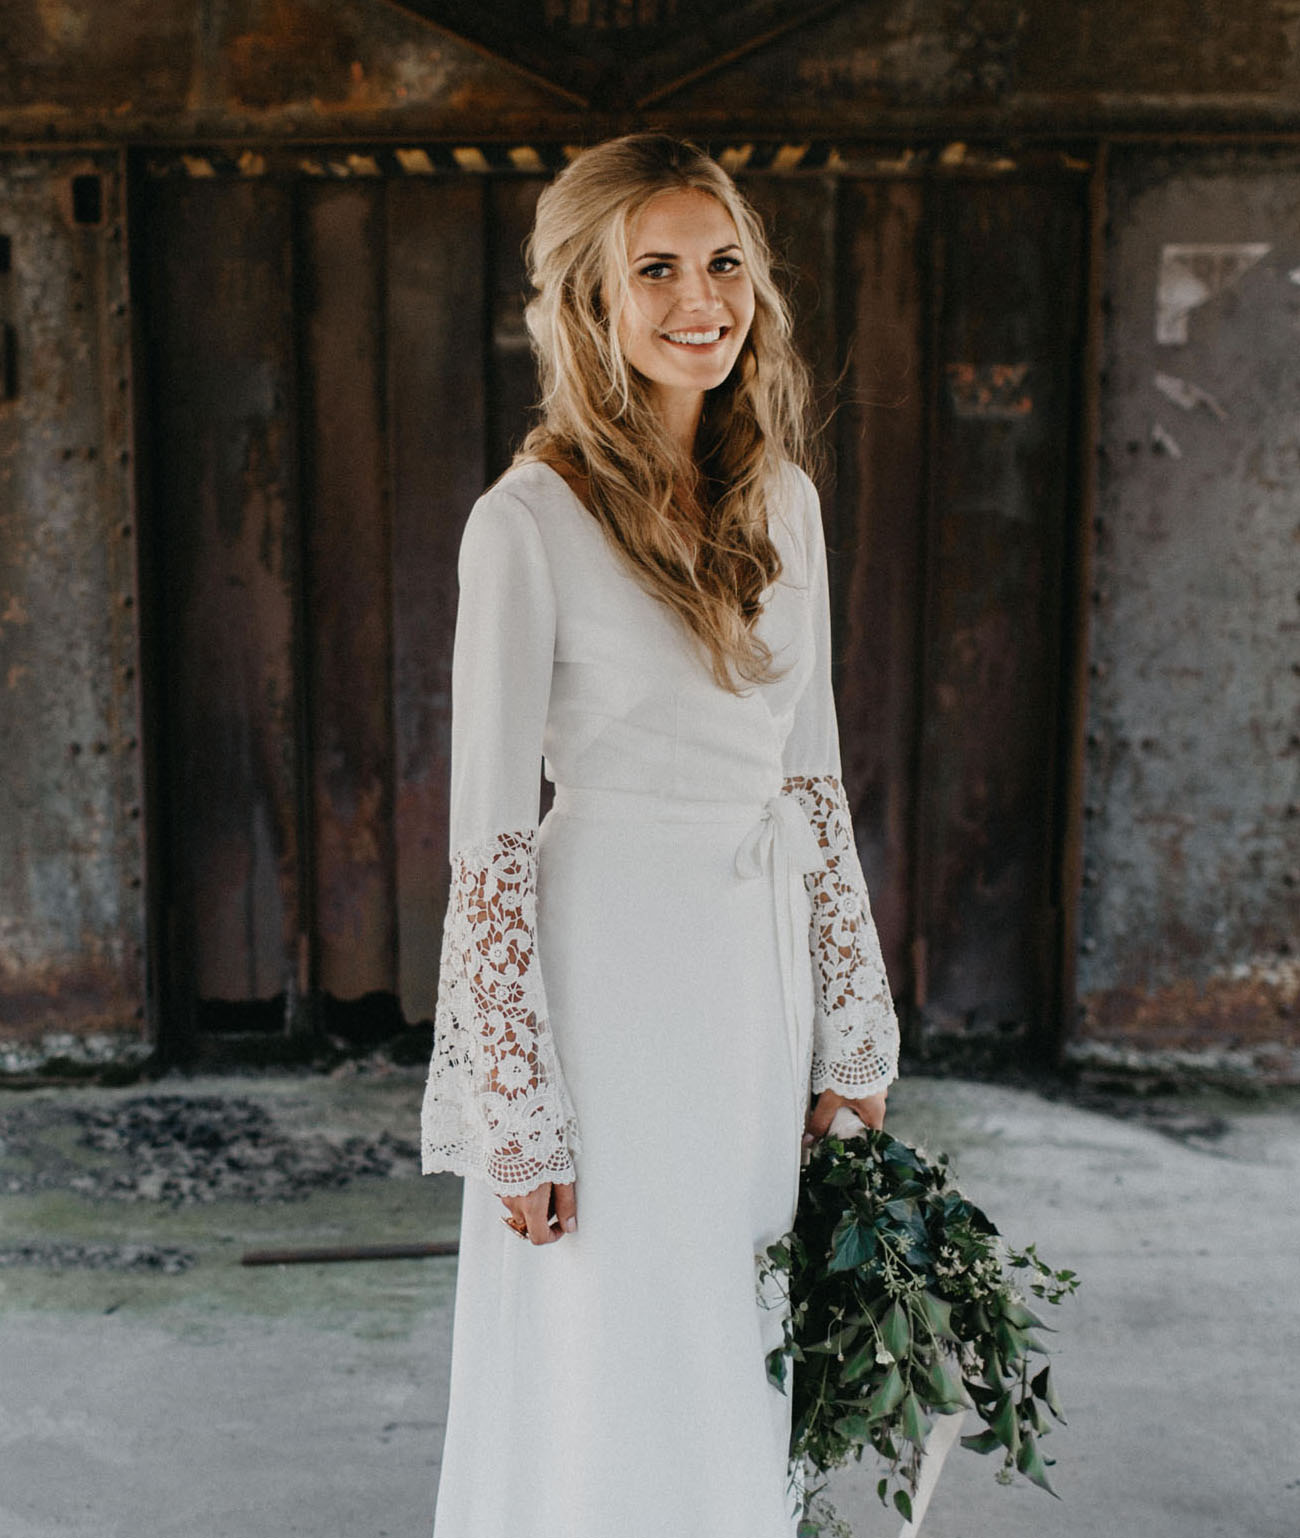 The bride designed her own boho inspired dress with a V neck and crocheted bell sleeves